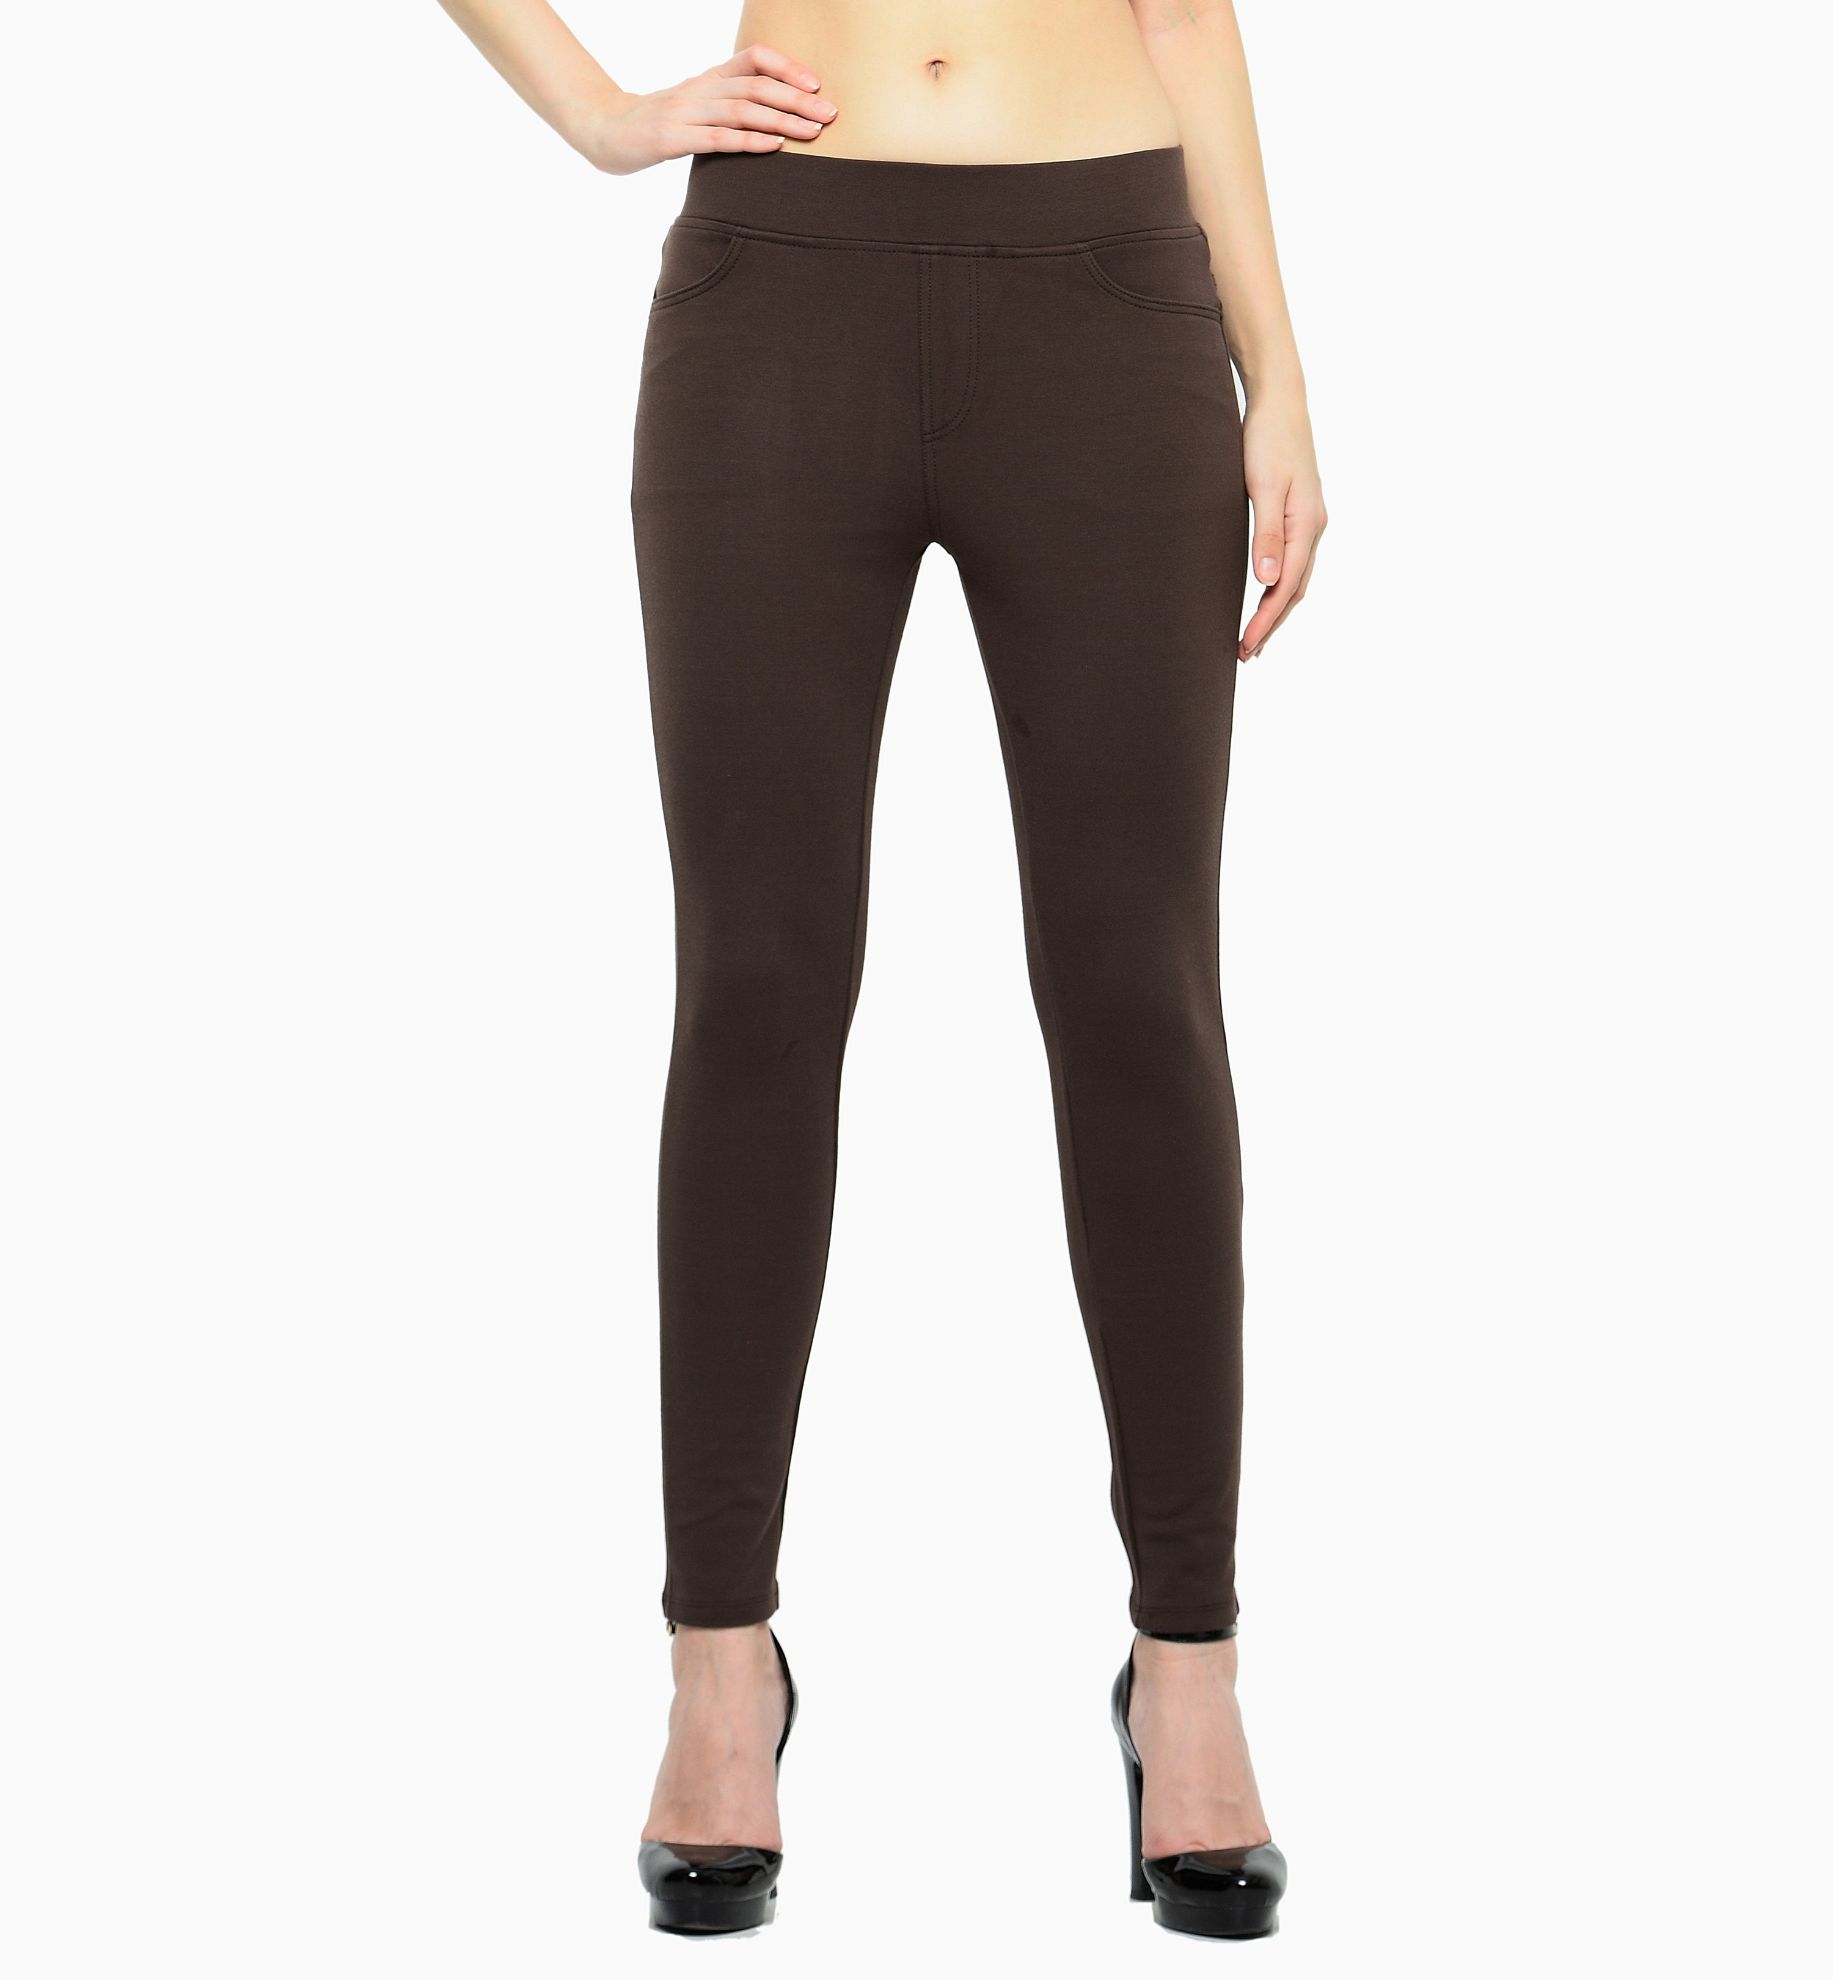 Frenchtrendz  Buy Frenchtrendz Cotton Poly Spandex Brown Jeggings Online